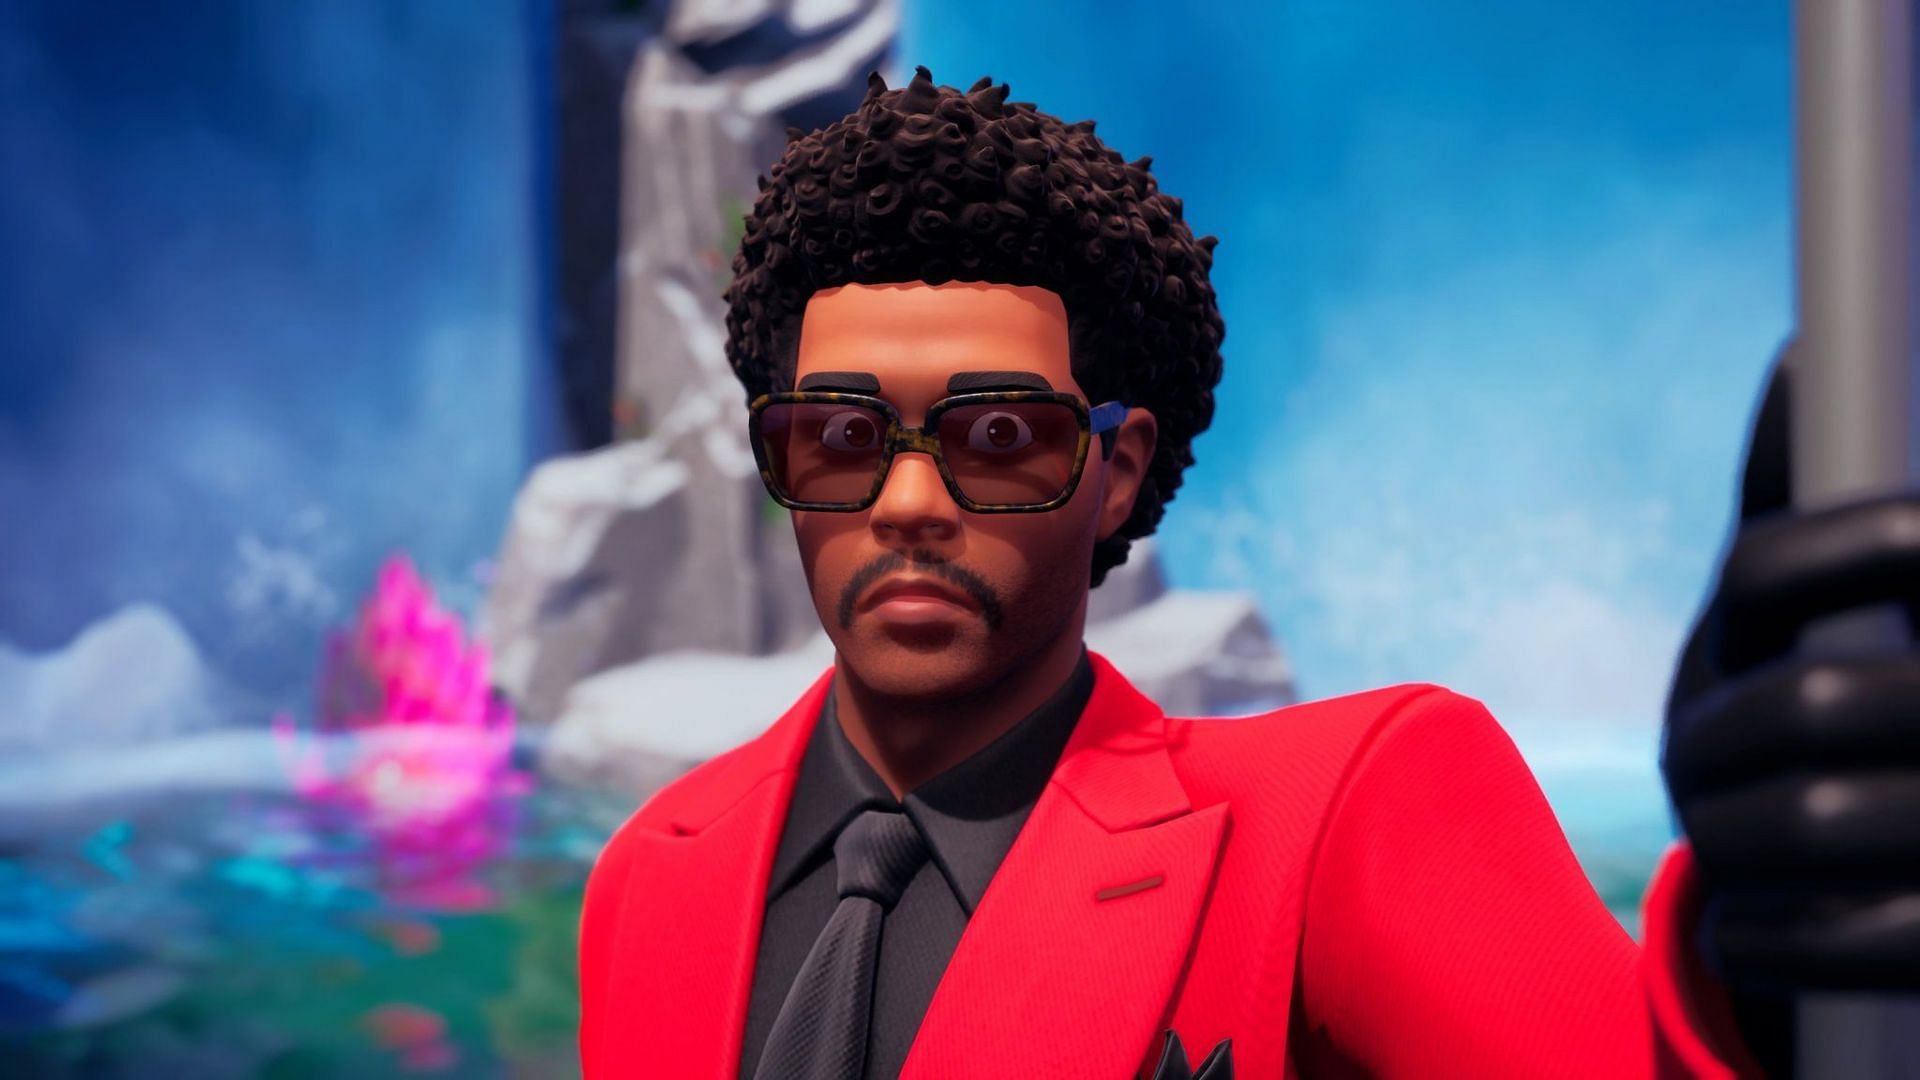 How to get The Weeknd Skin in Fortnite (Image via Twitter/MKXJOSE)